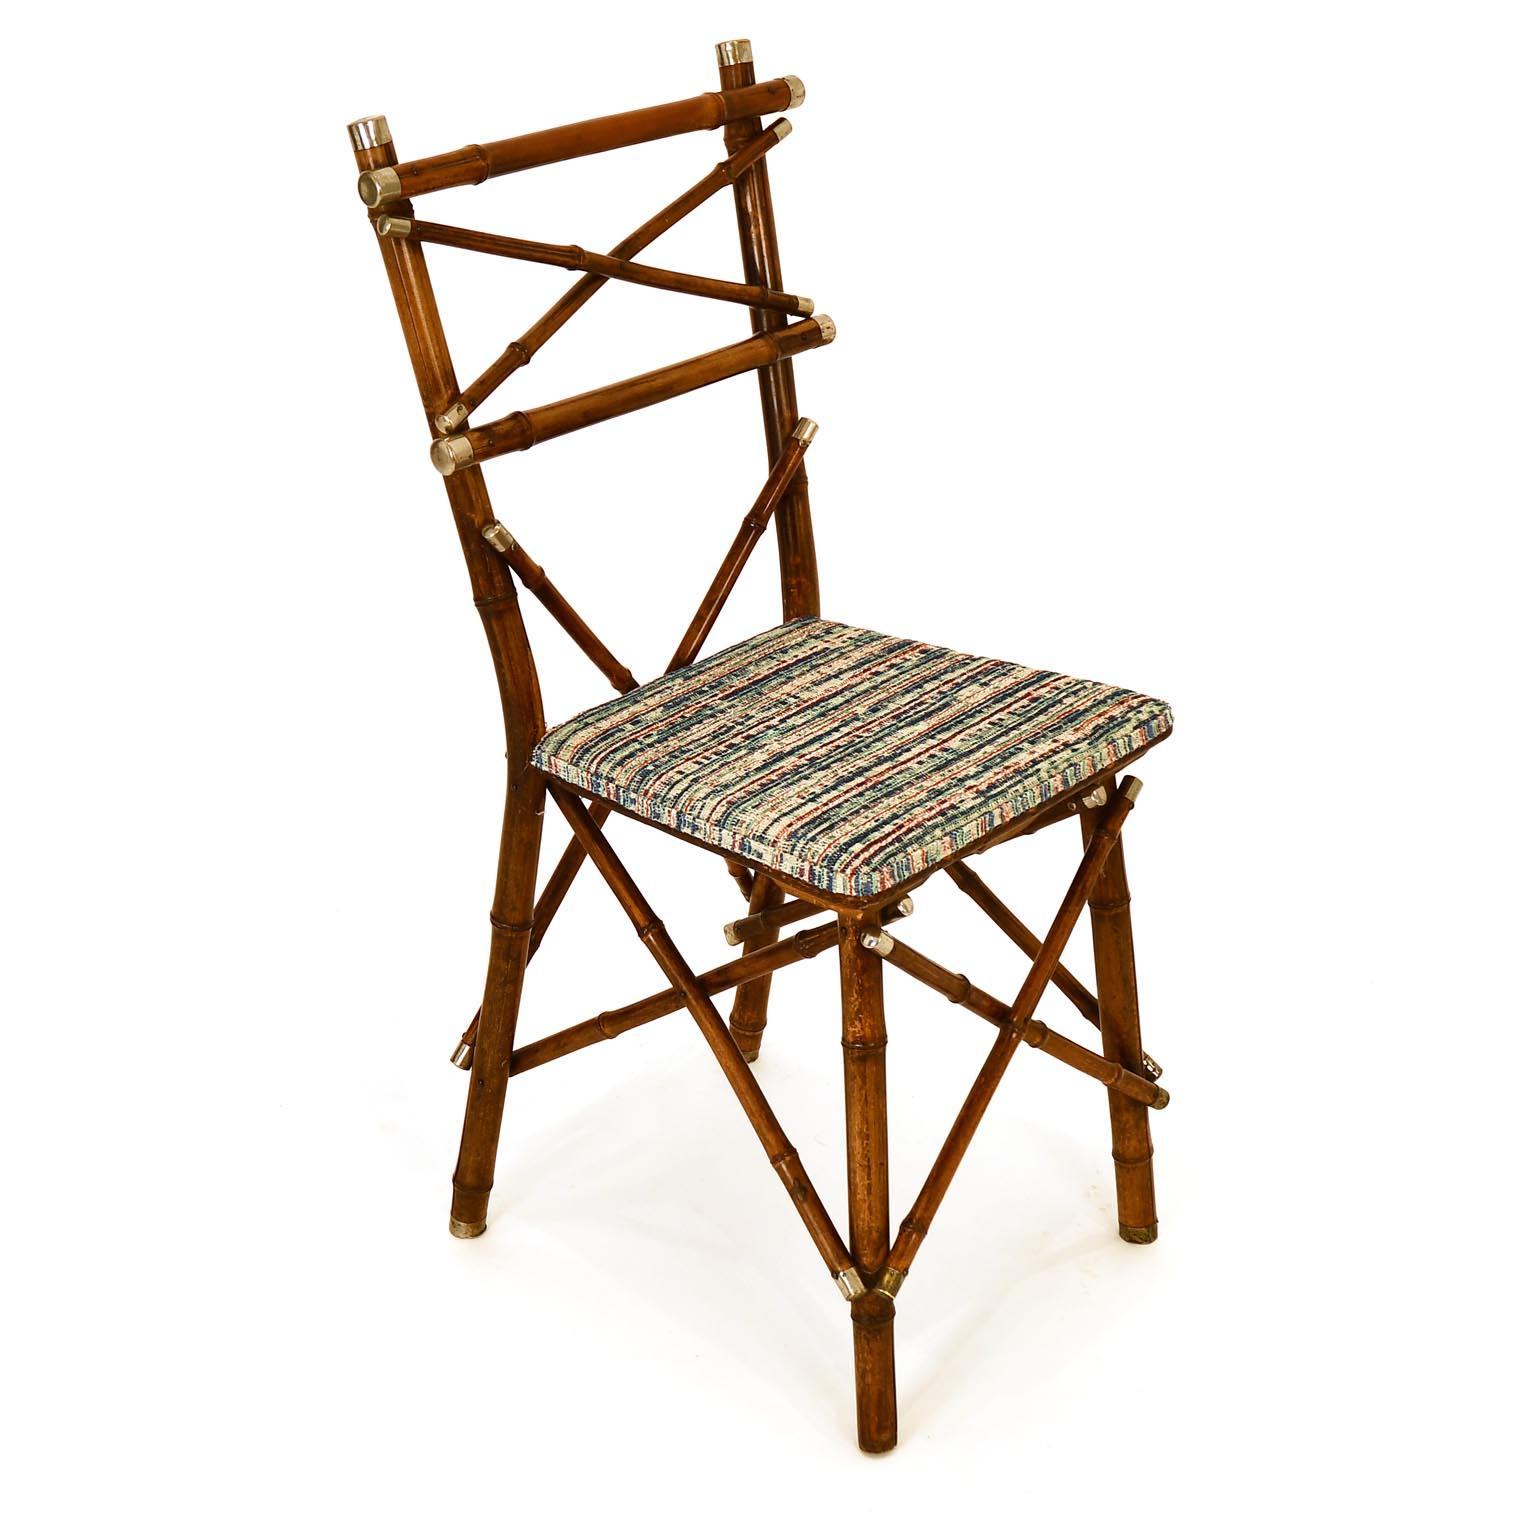 Austrian Decorative Early 20th Century Bamboo Chair, Upholstery, Austria, 1910s